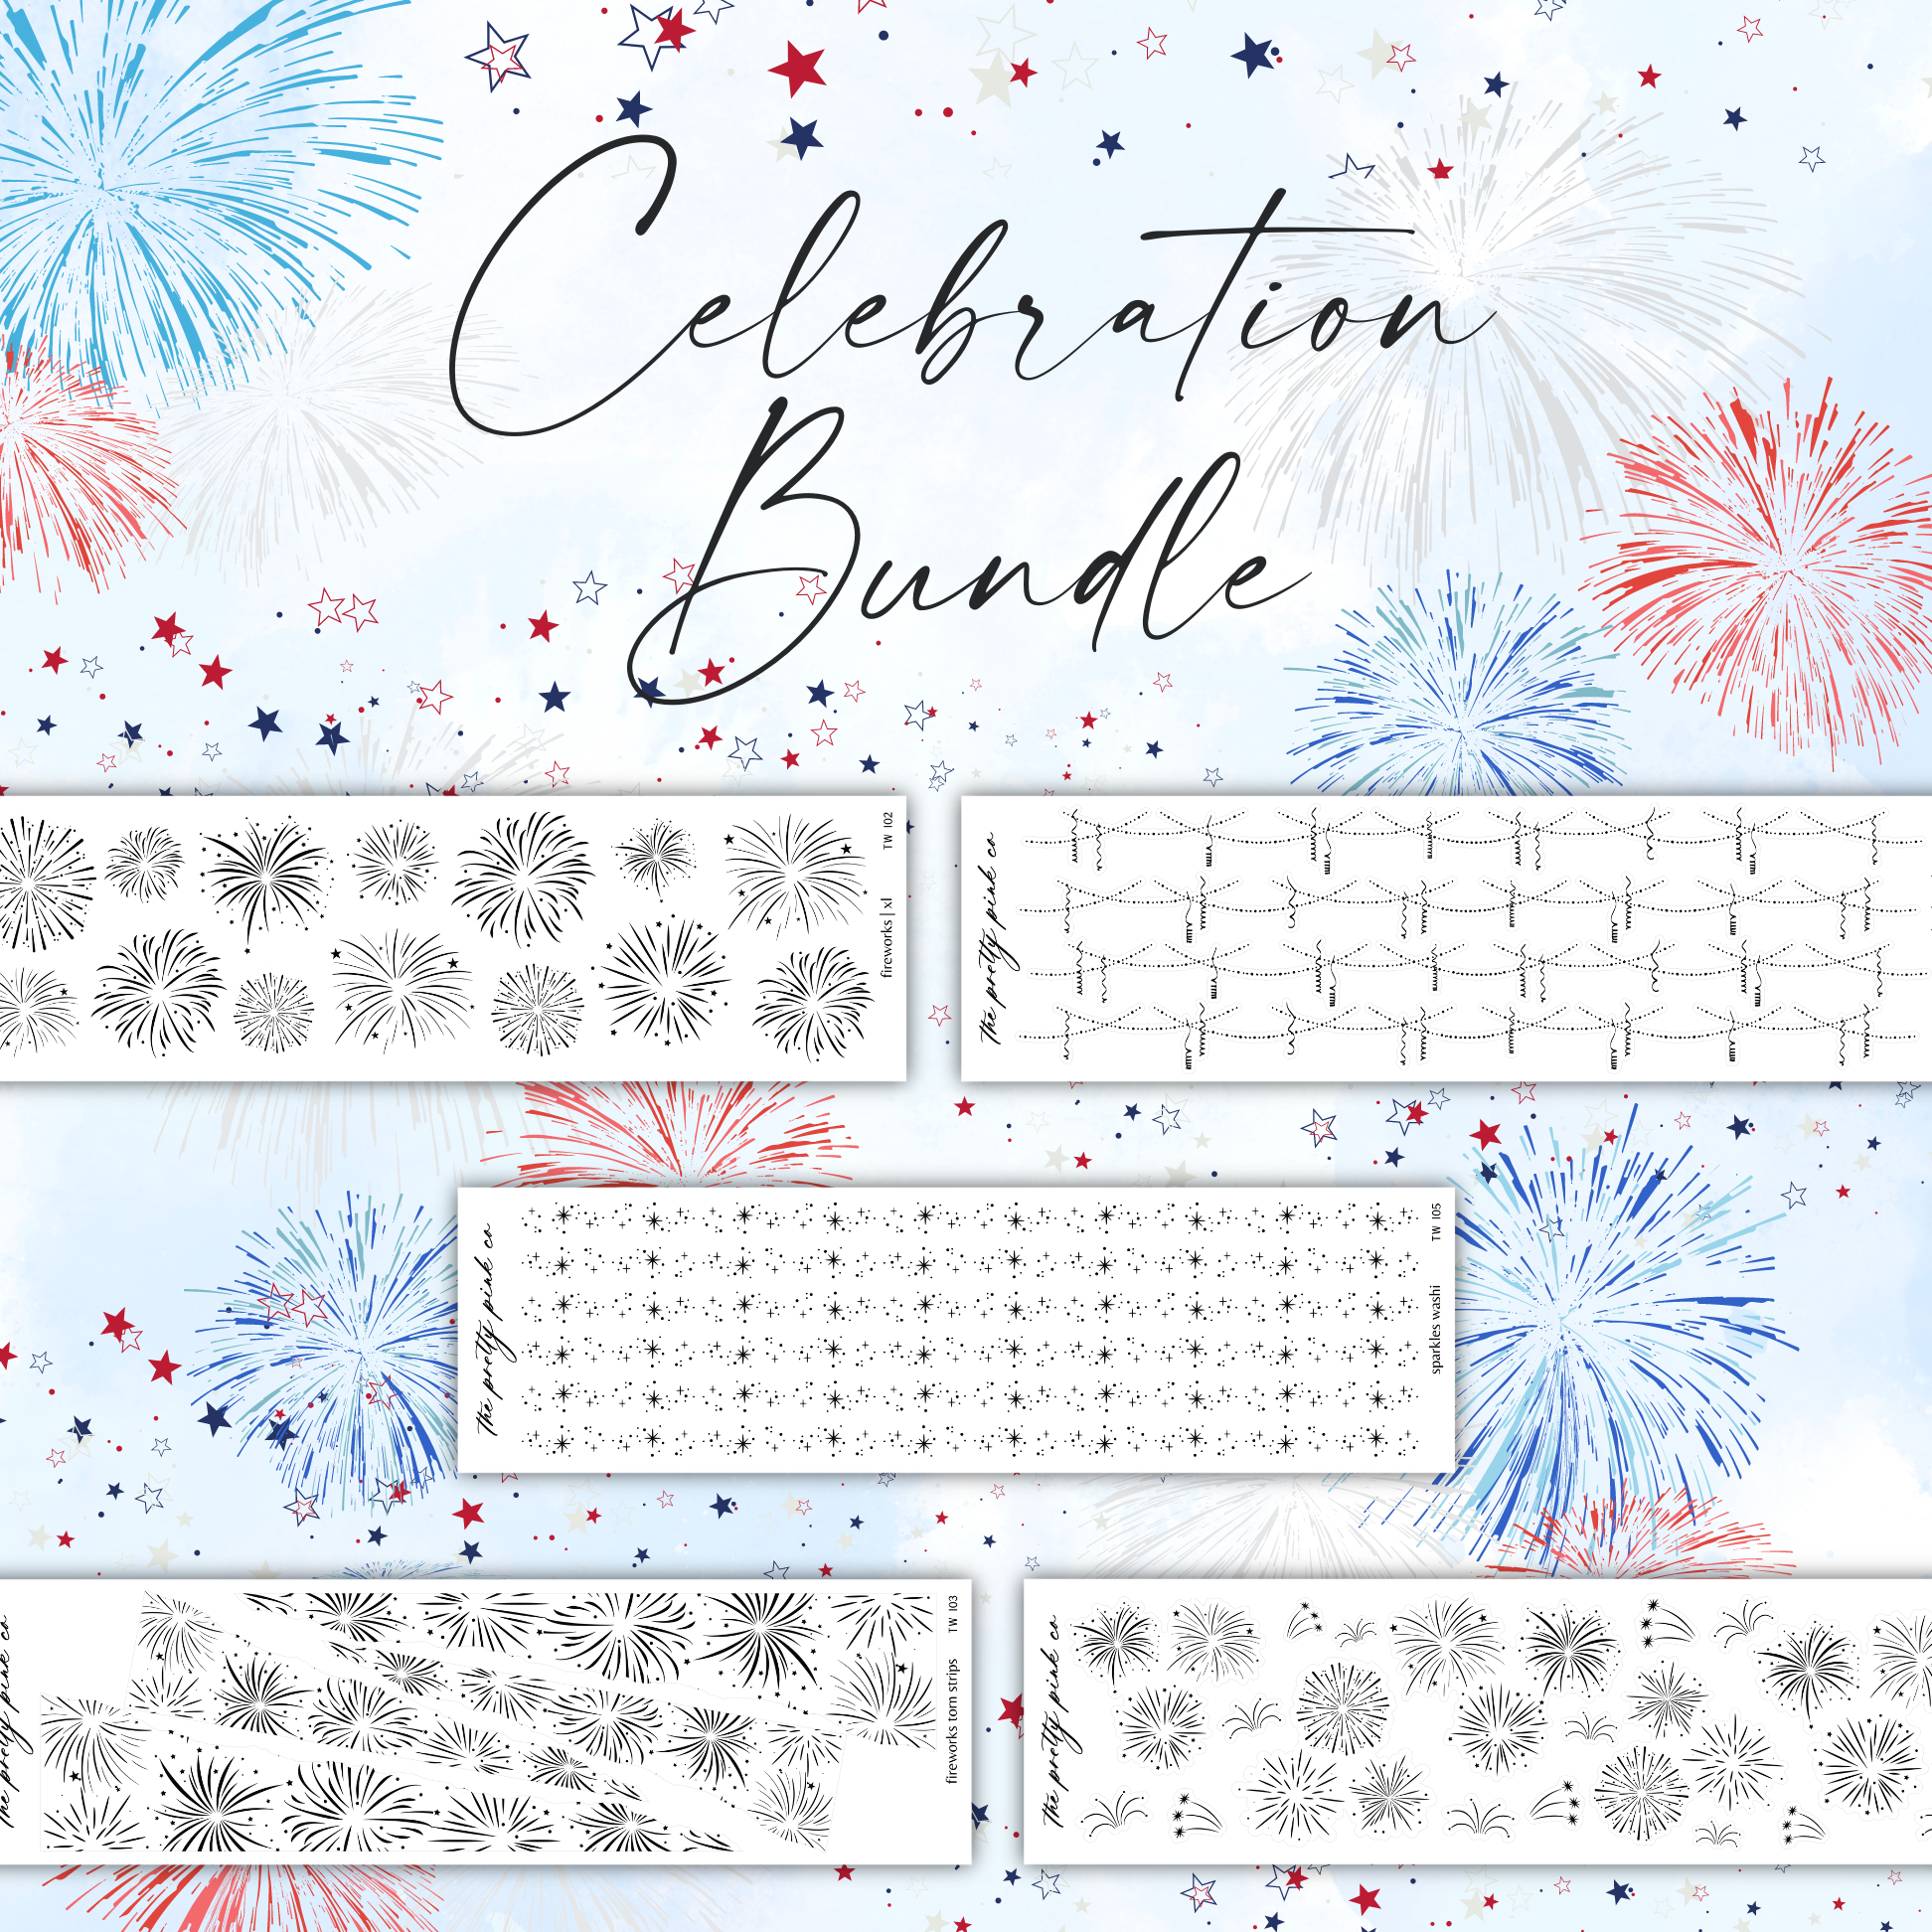 a calendar with fireworks and stars on it